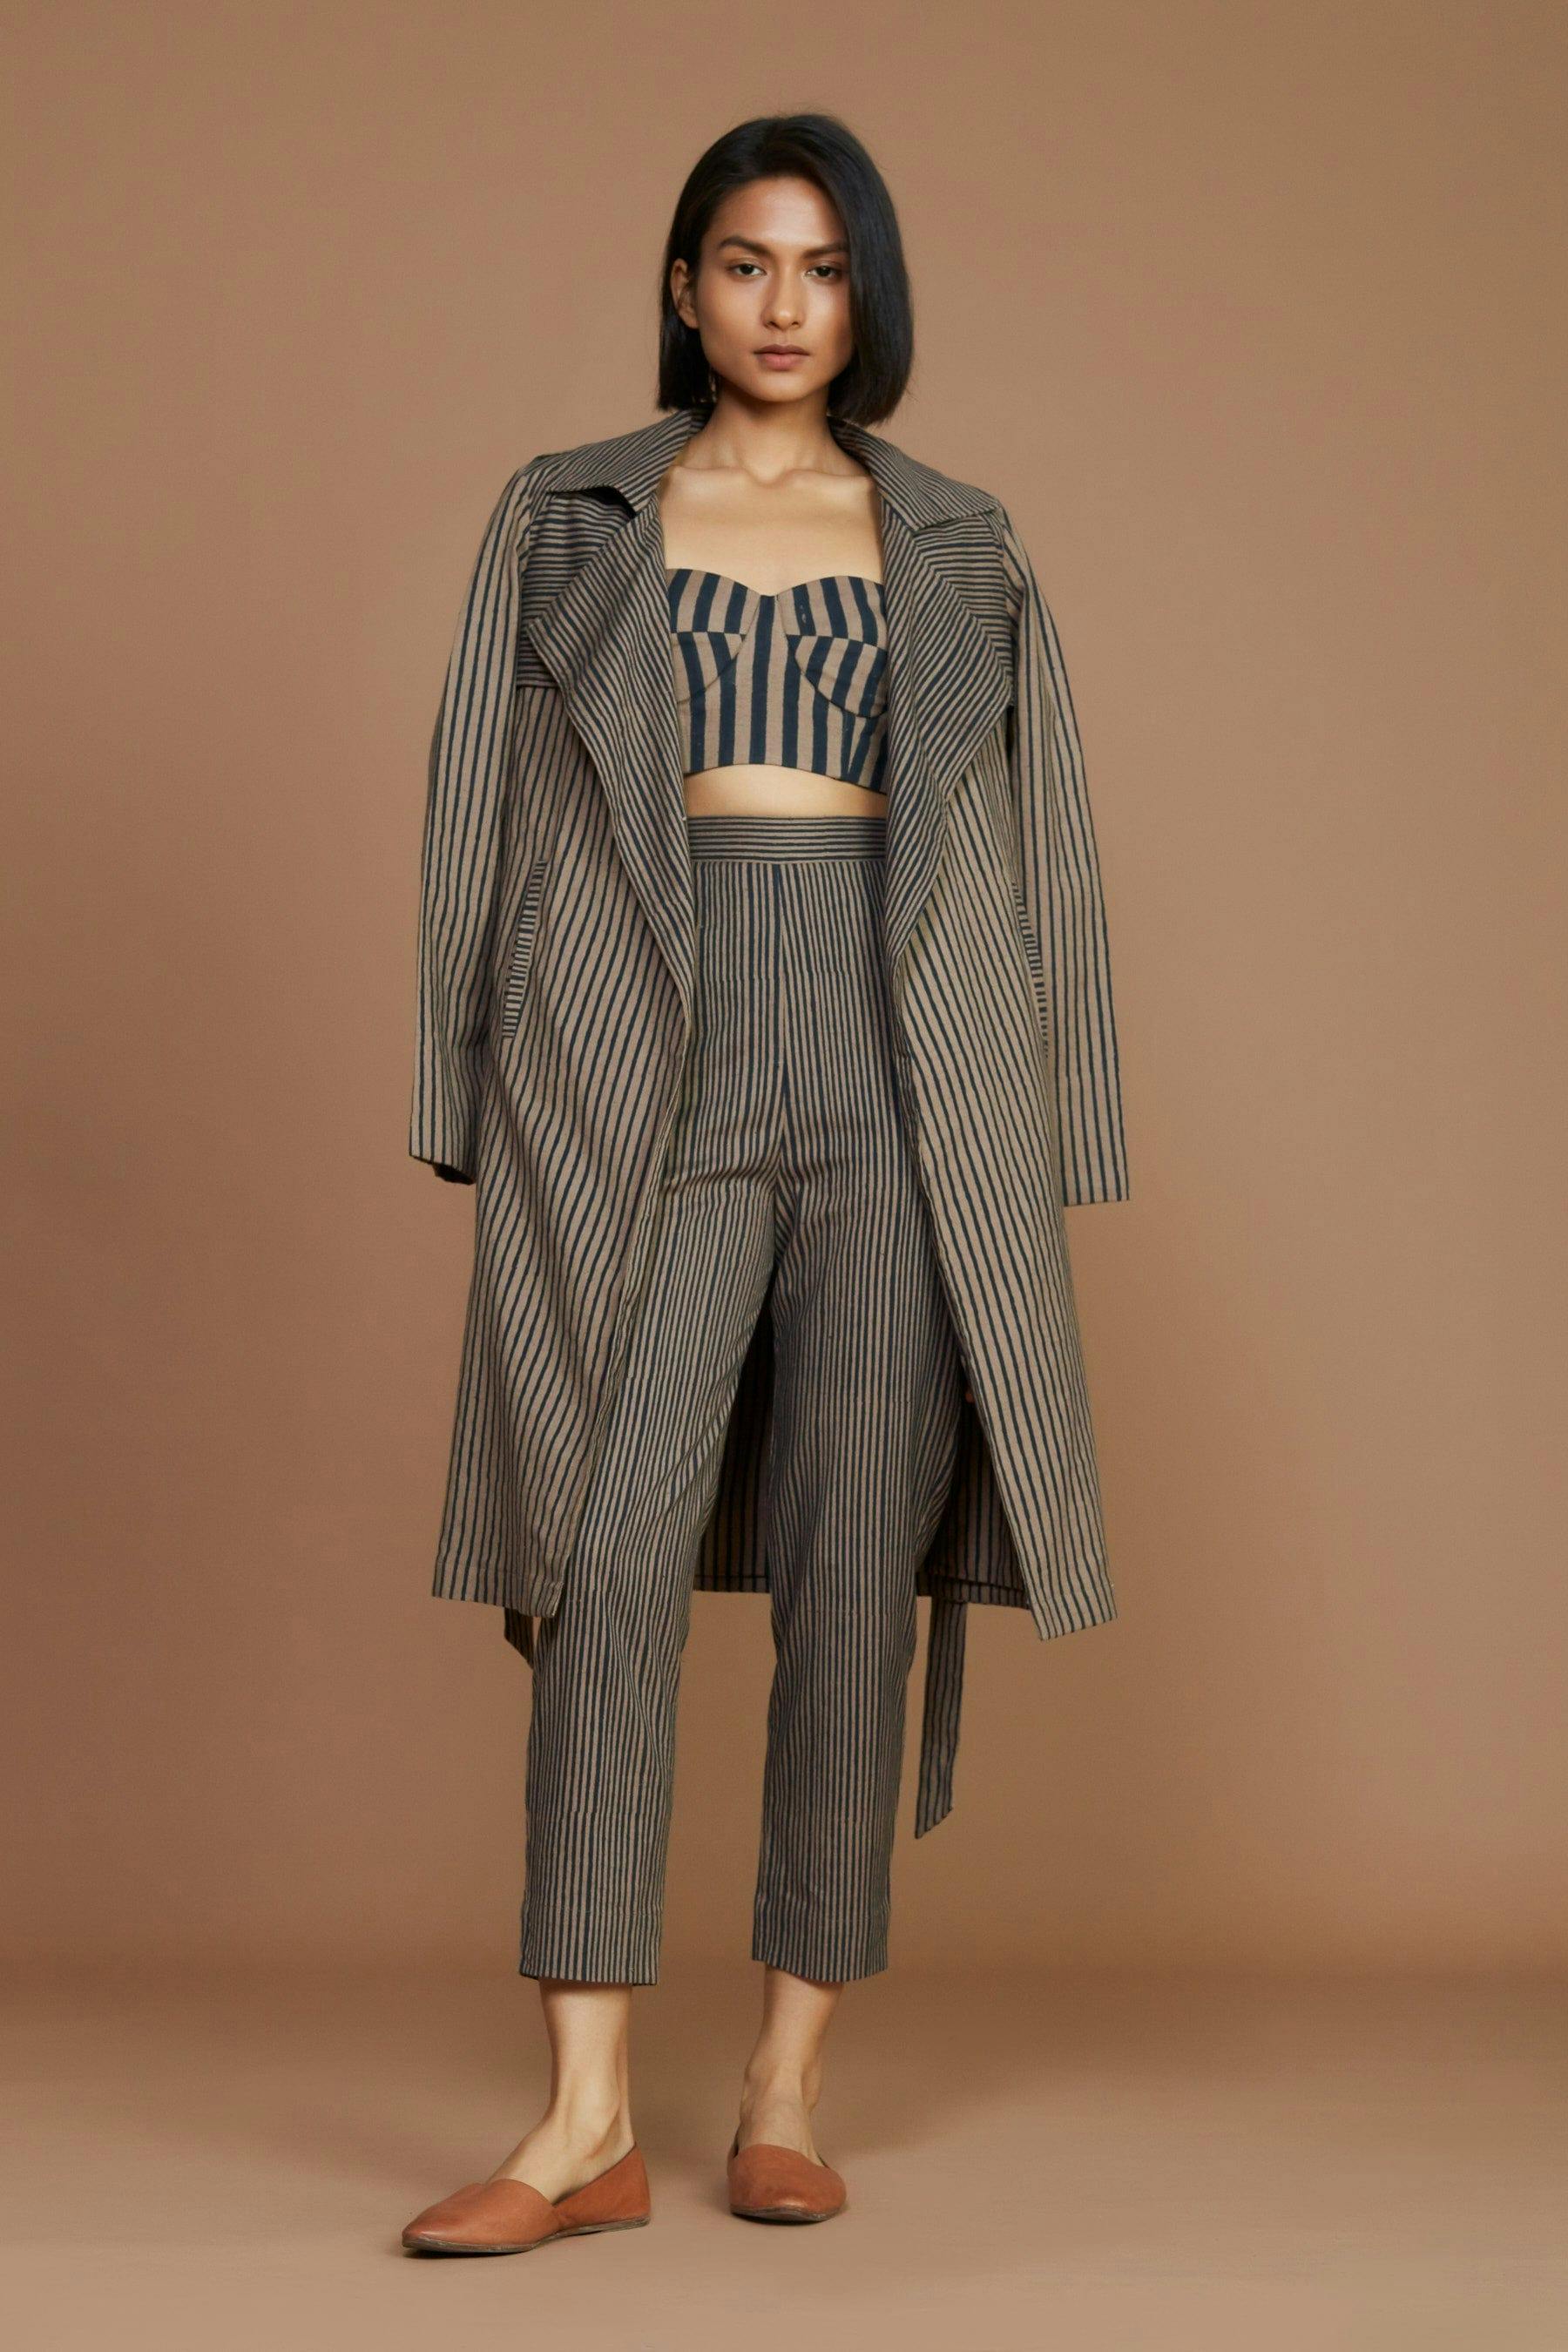 Brown with Charcoal Striped Trench Jacket, a product by Style Mati